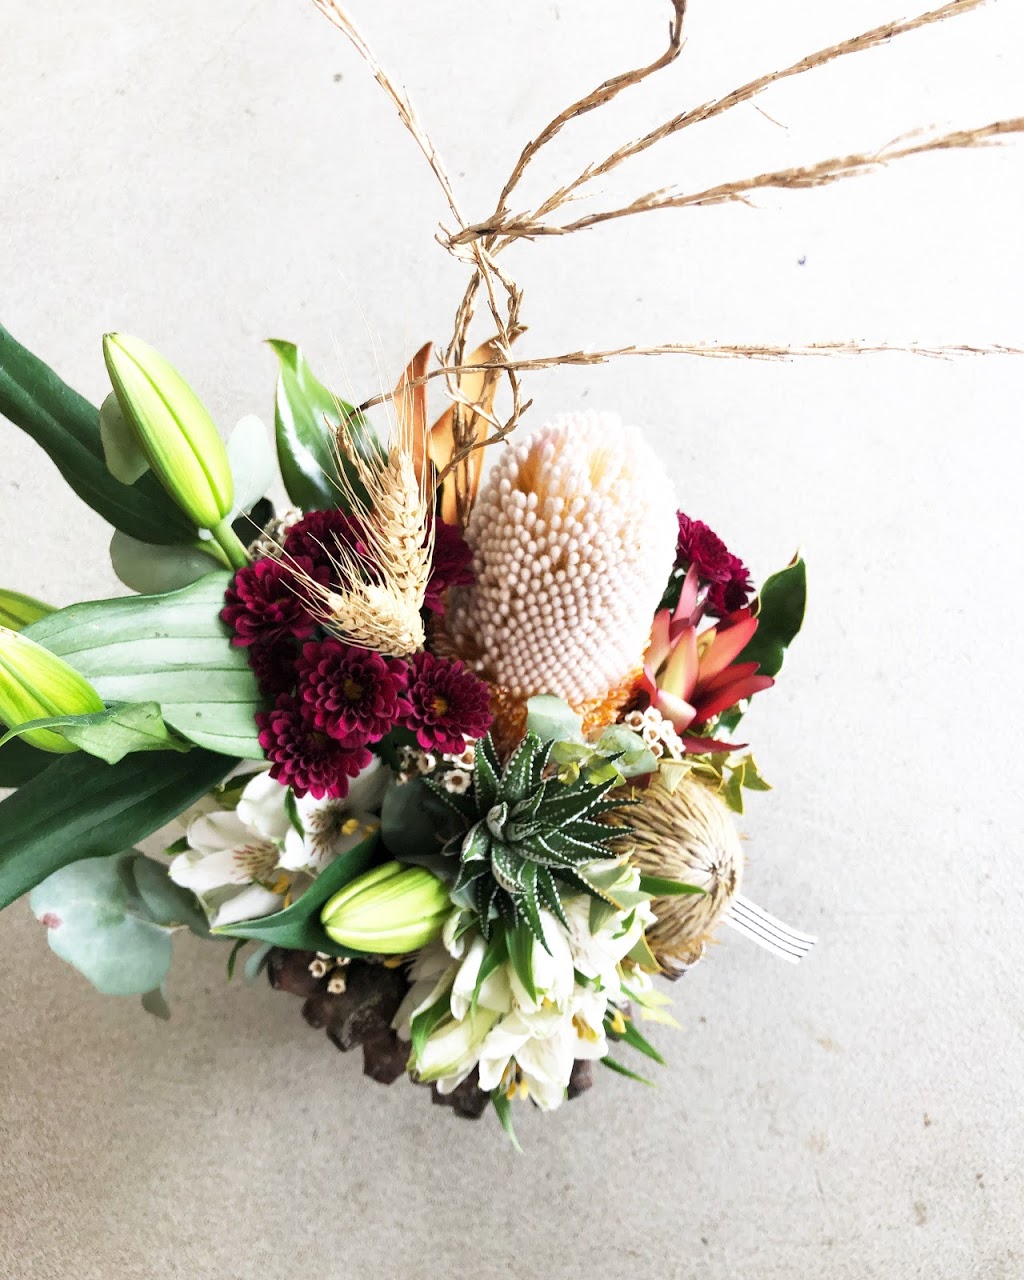 Flowers by Rhi | florist | 26 Shakespeare St, Traralgon VIC 3844, Australia | 0449292933 OR +61 449 292 933